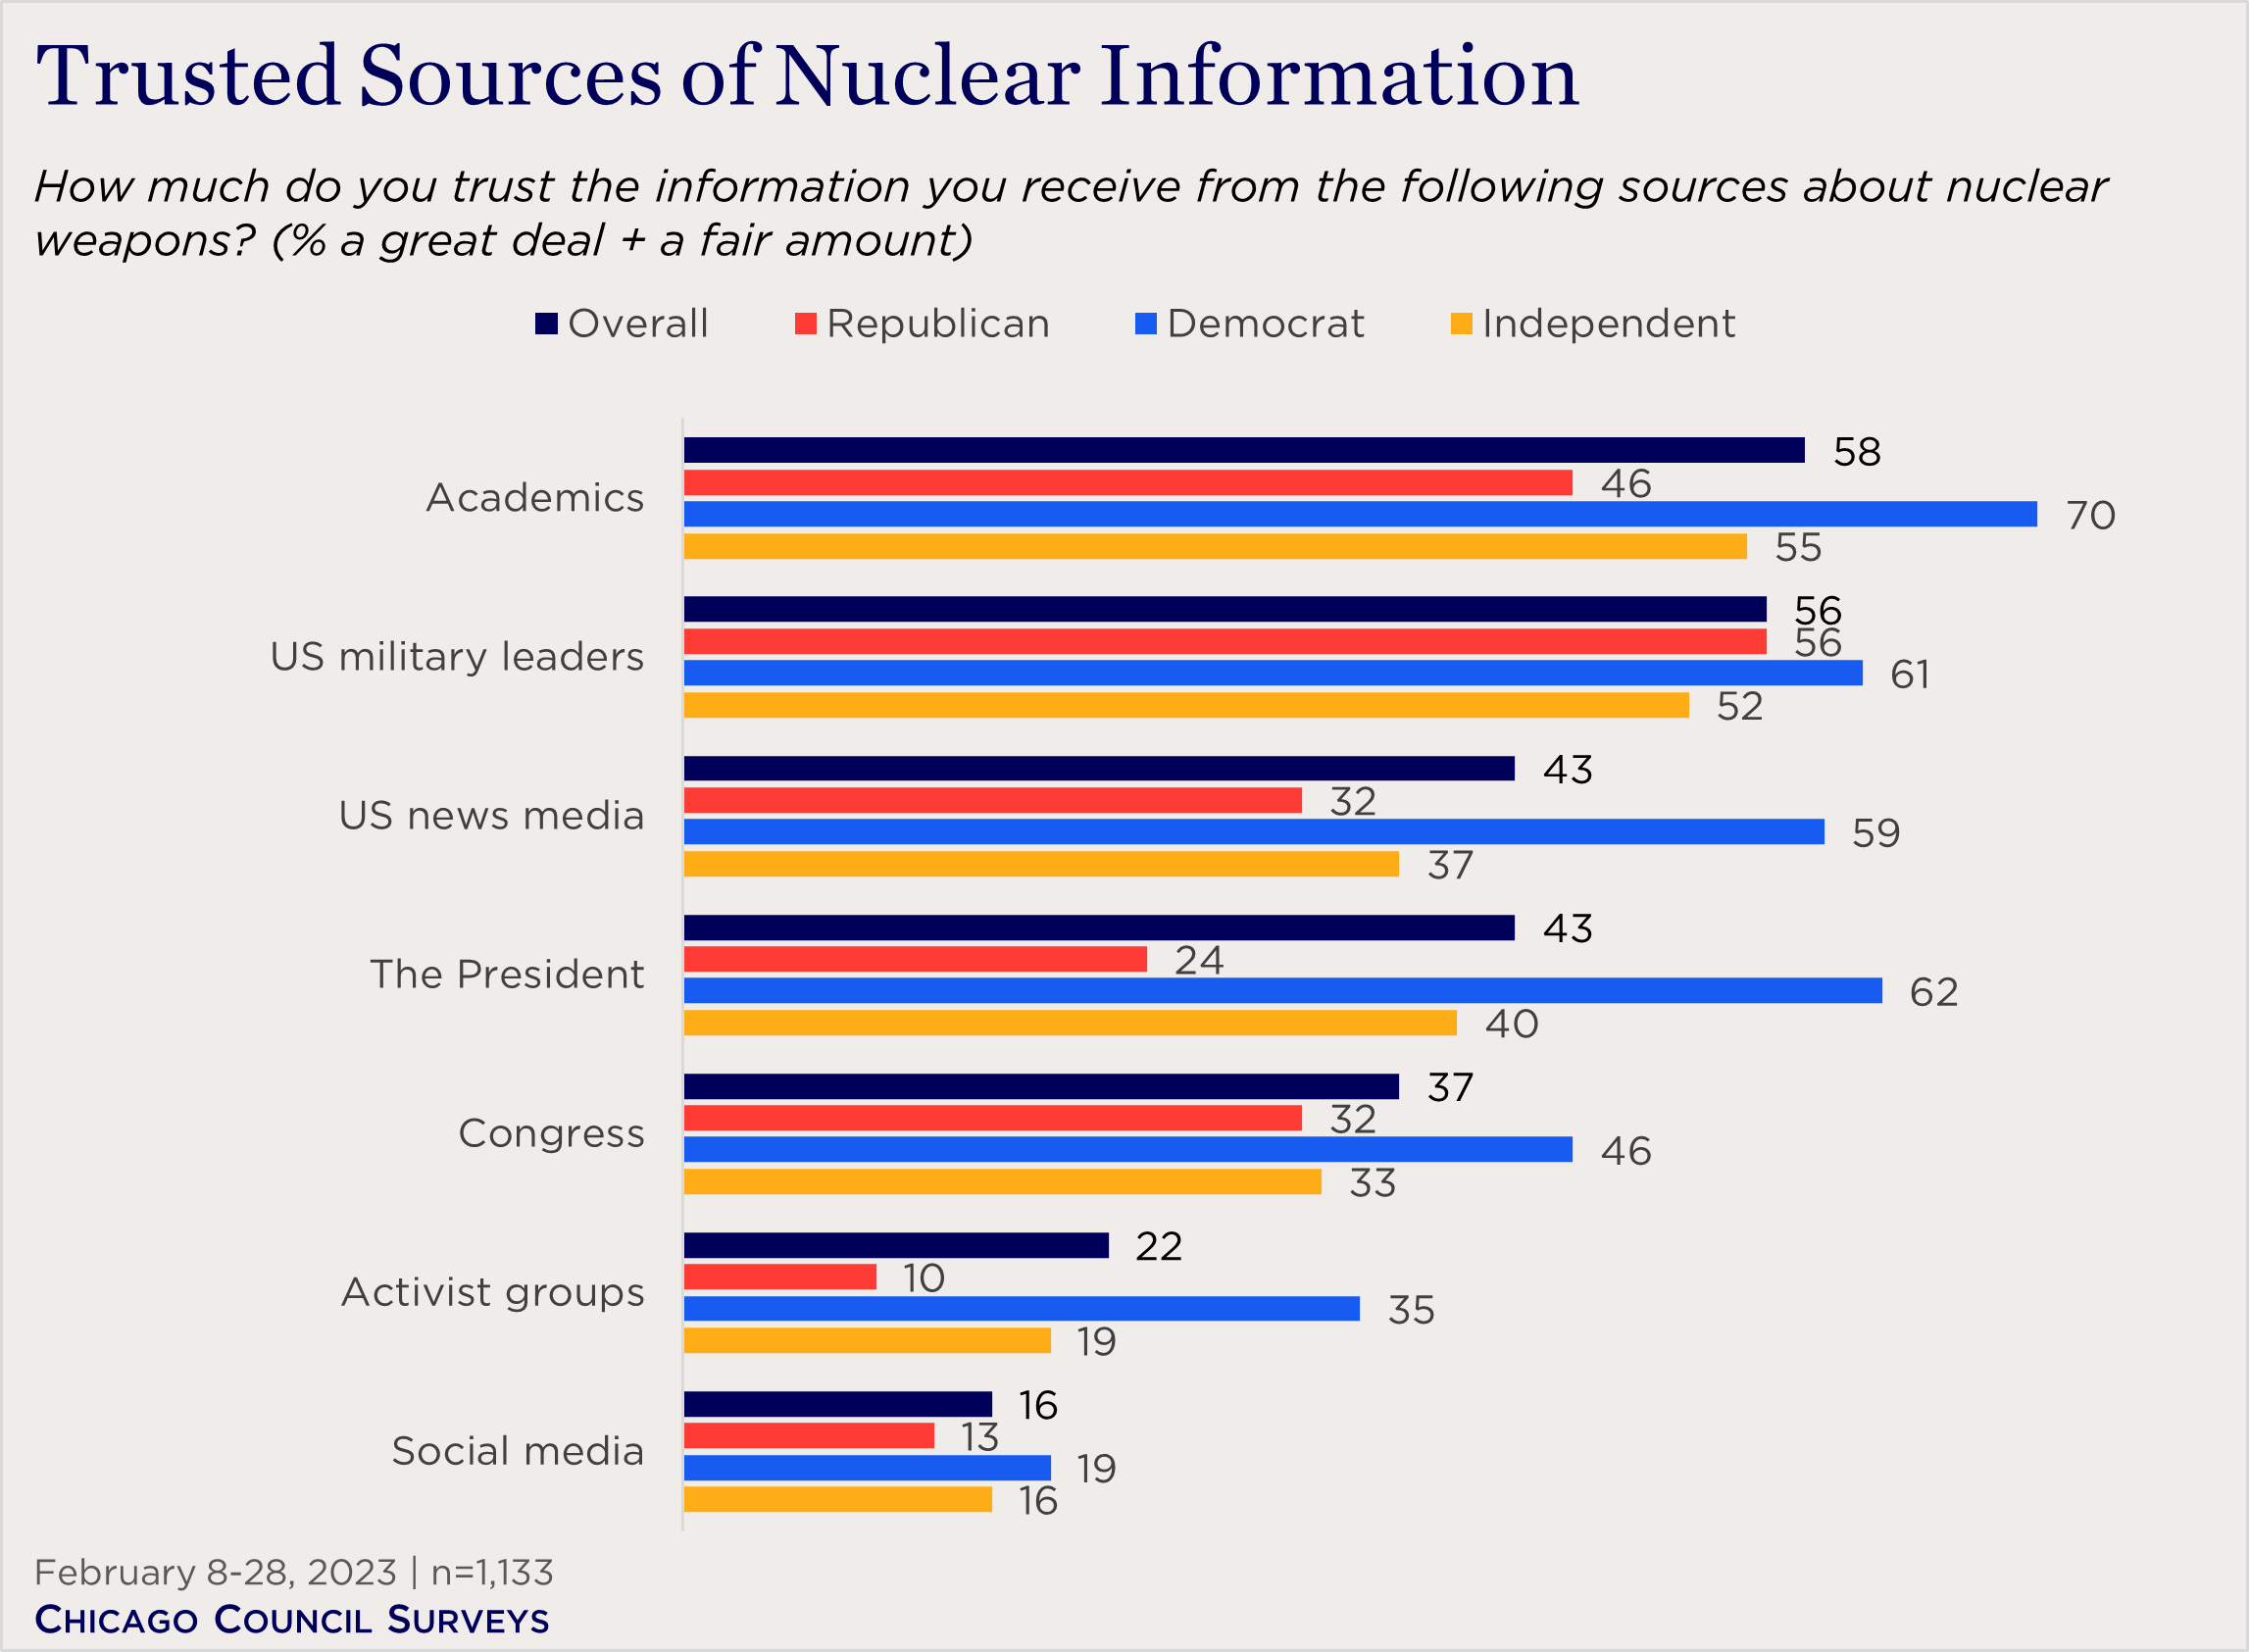 bar chart showing views of trusted sources of nuclear information by party